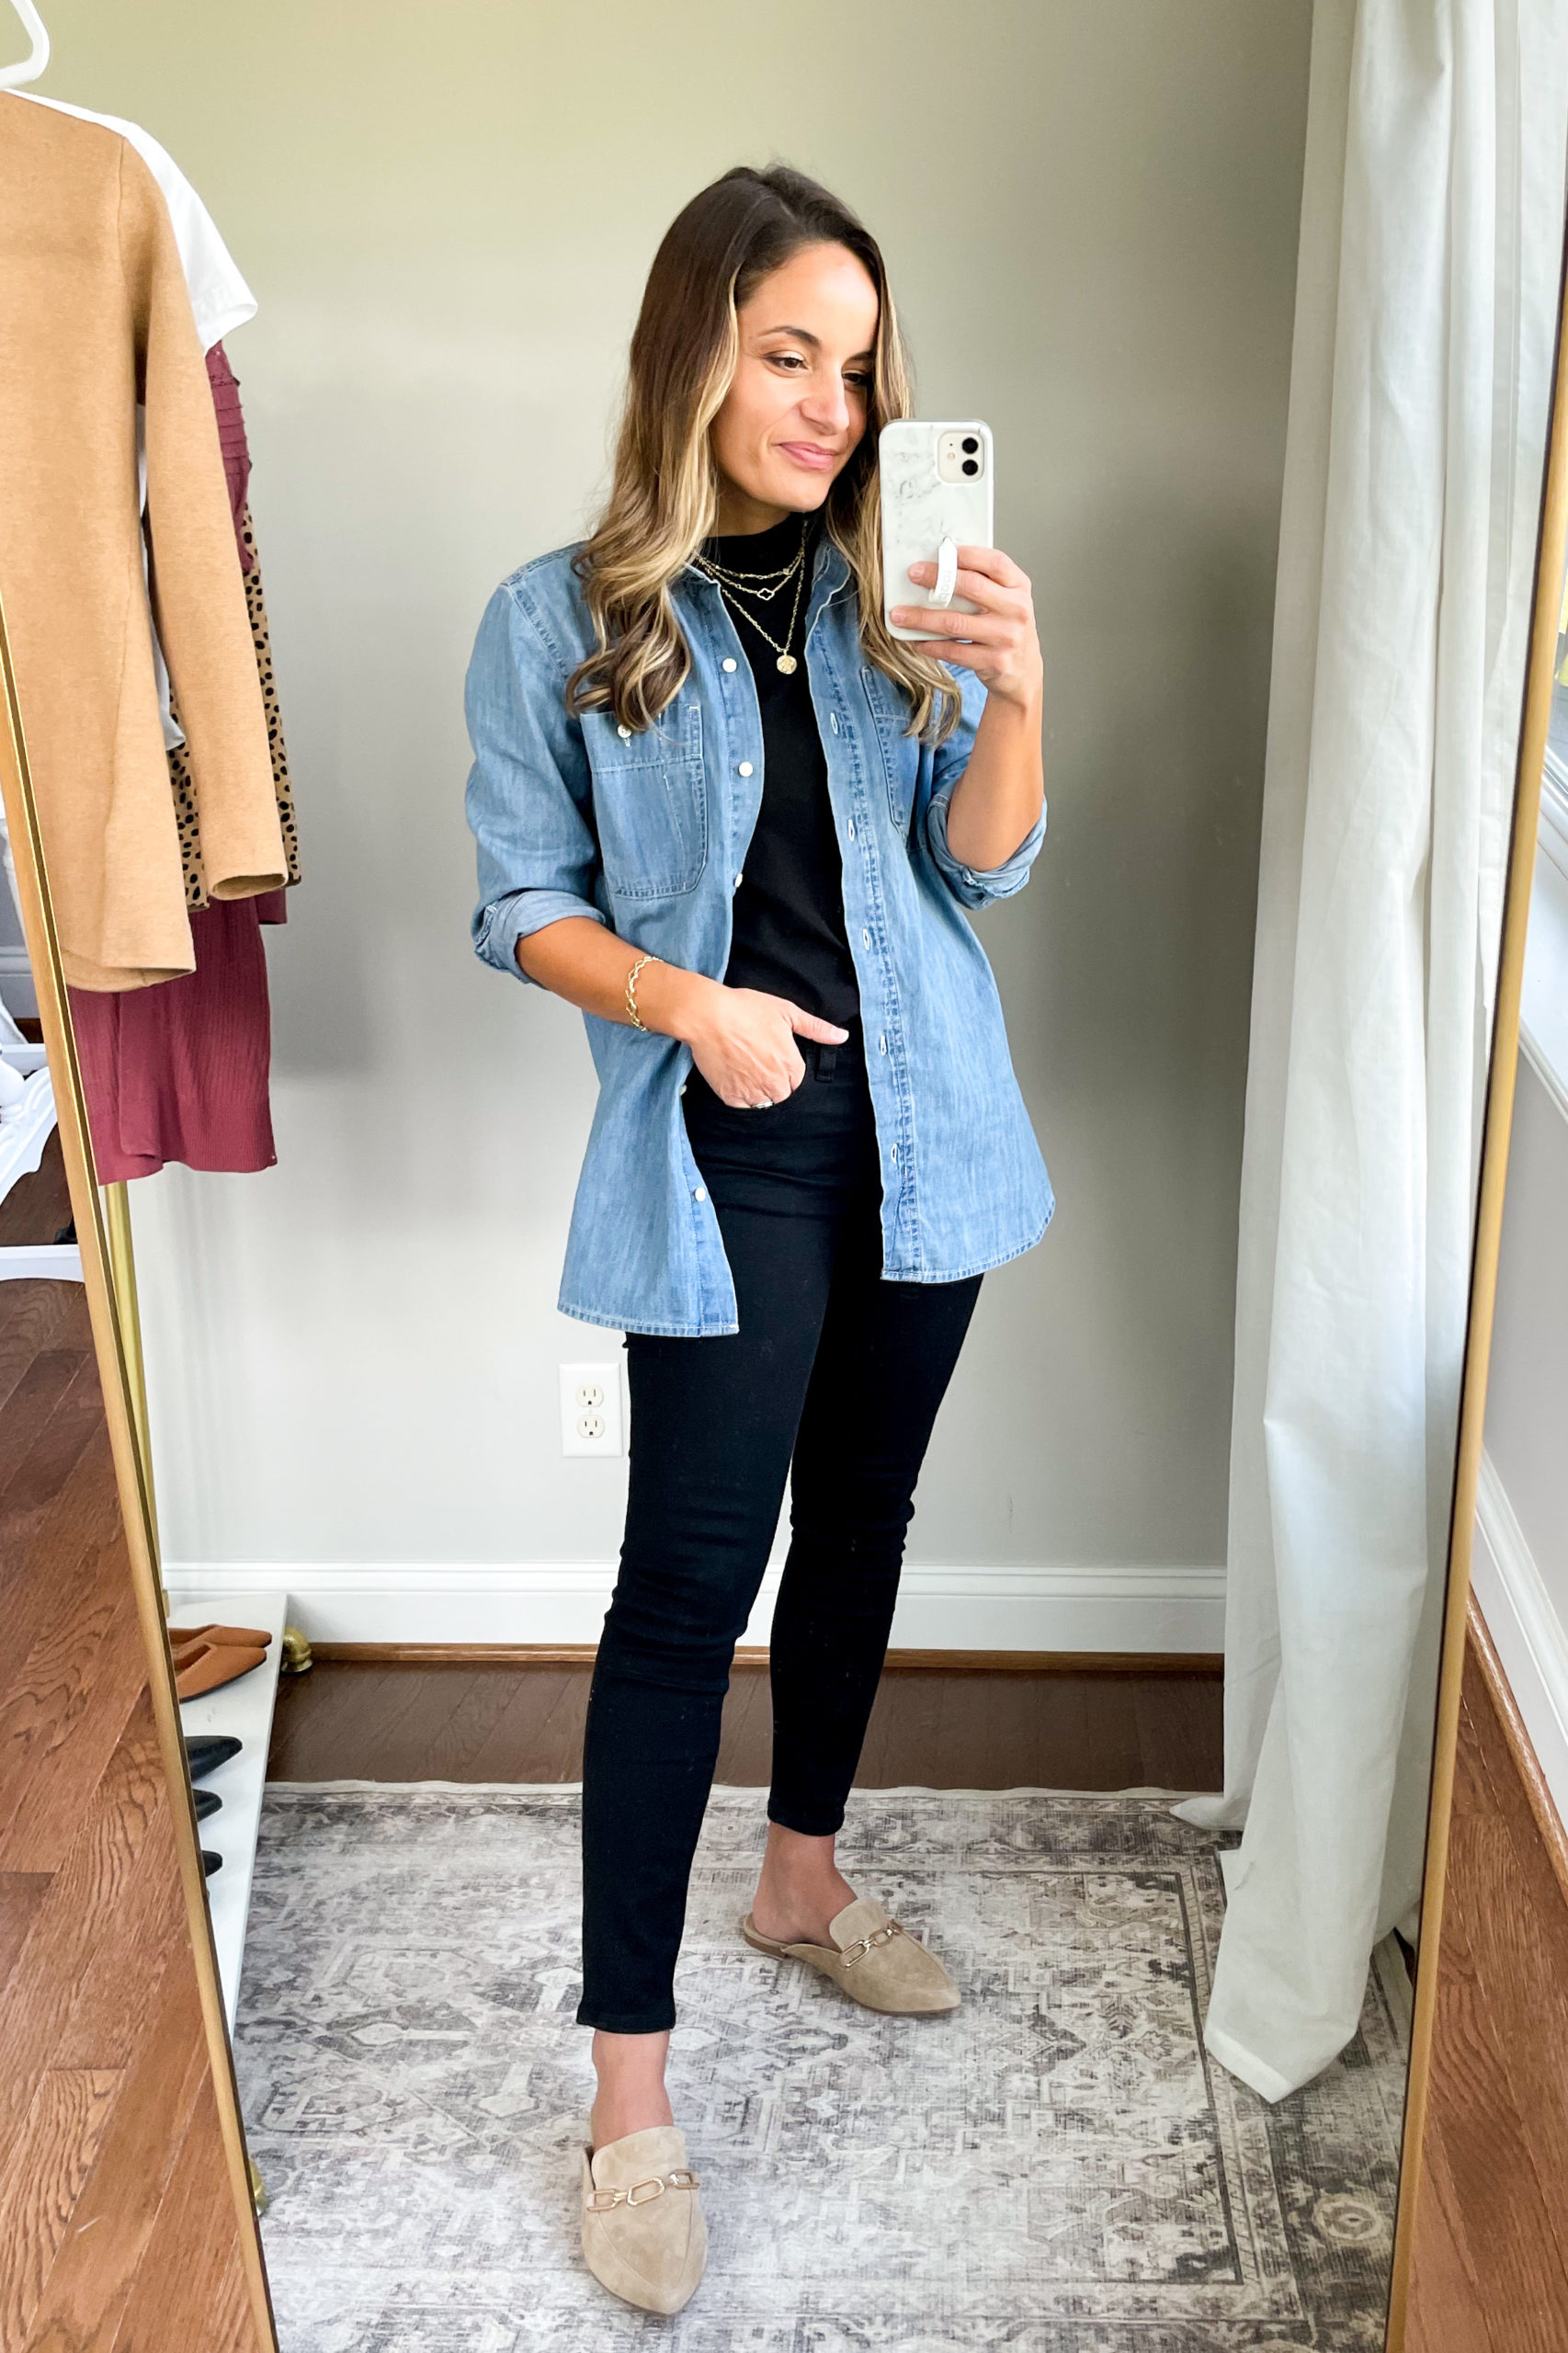 What to wear with black jeans - 30+ Black Jeans Outfit Ideas